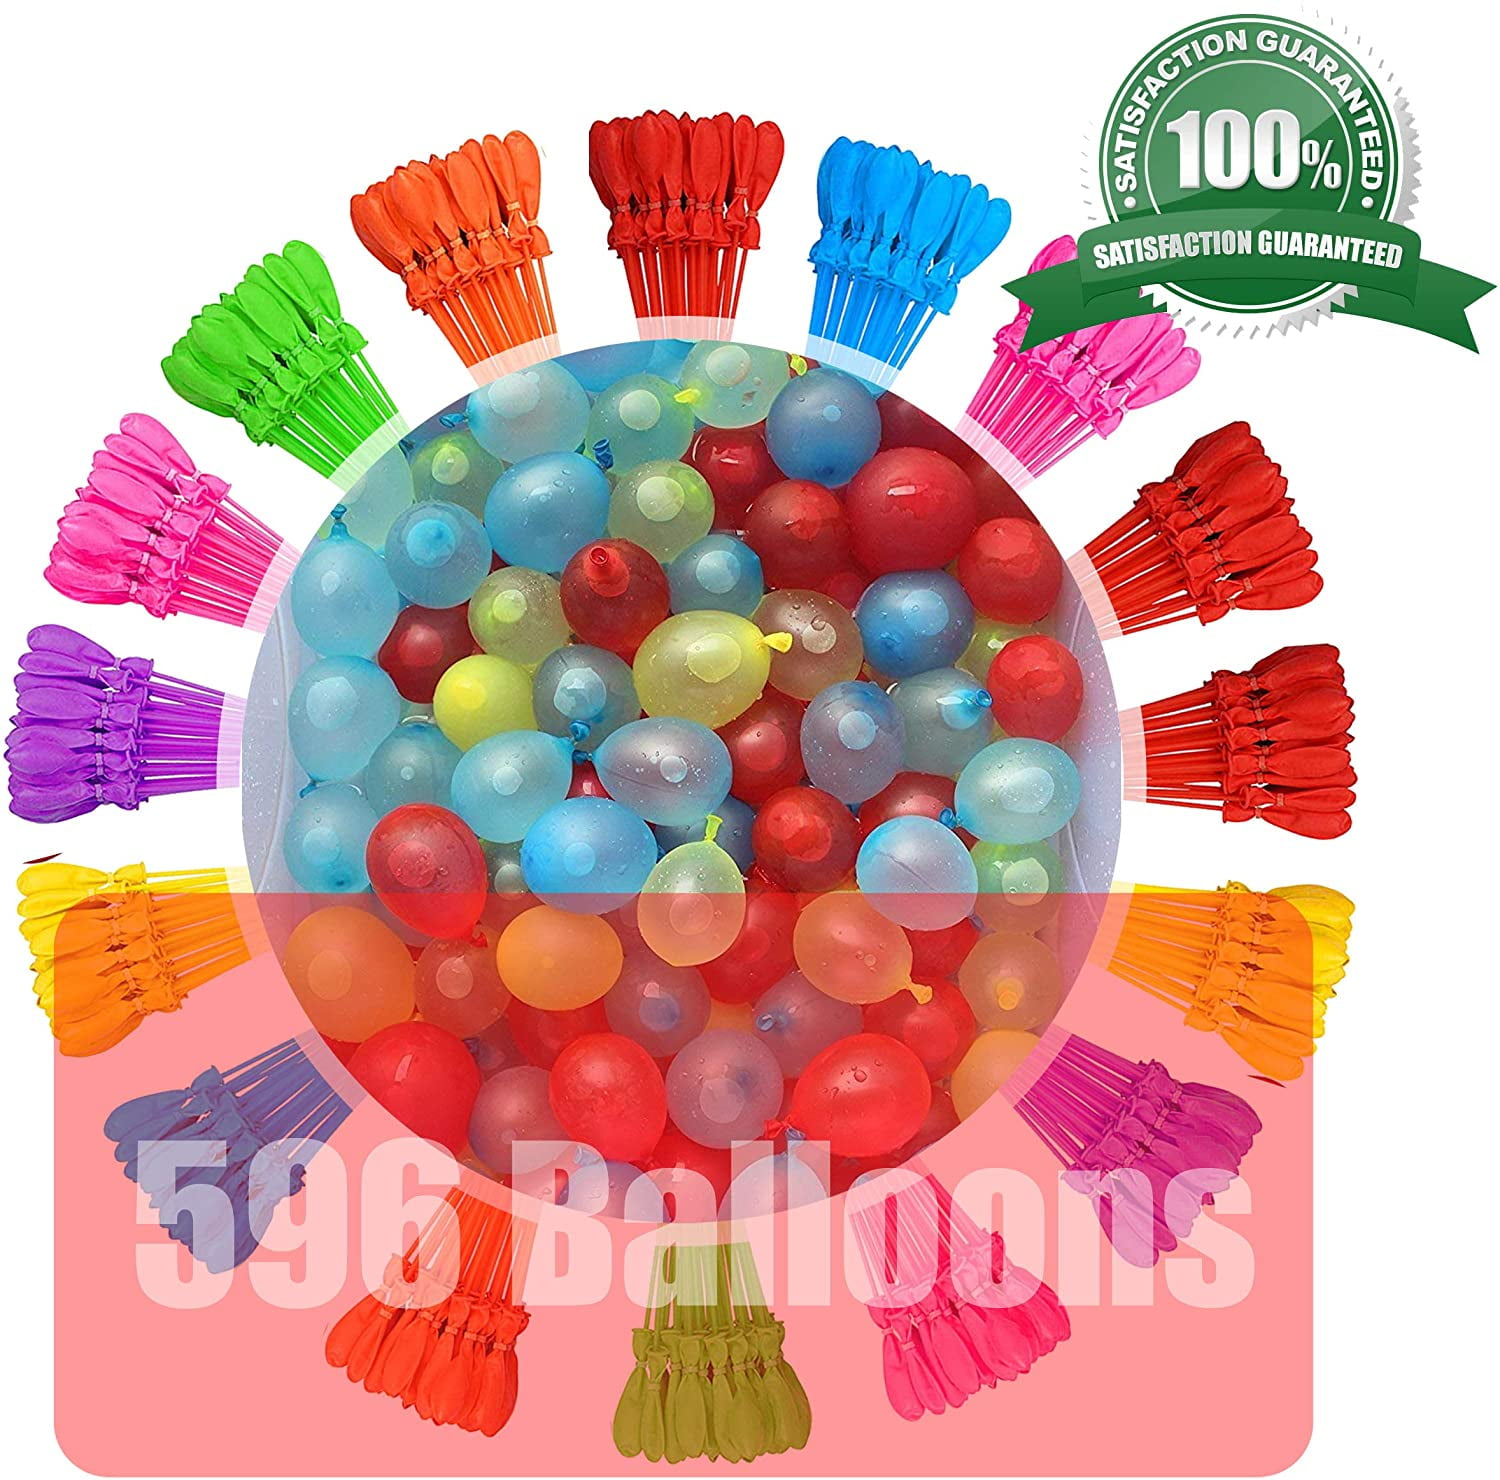 Tiny Balier Water Balloons 596 Balloons 16 Packs SELF Sealing Balloons Fill in 60 Seconds Easy Quick Summer Splash Fun Outdoor Backyard Kids and Adults Party Water Bomb Fight Games TT1534 